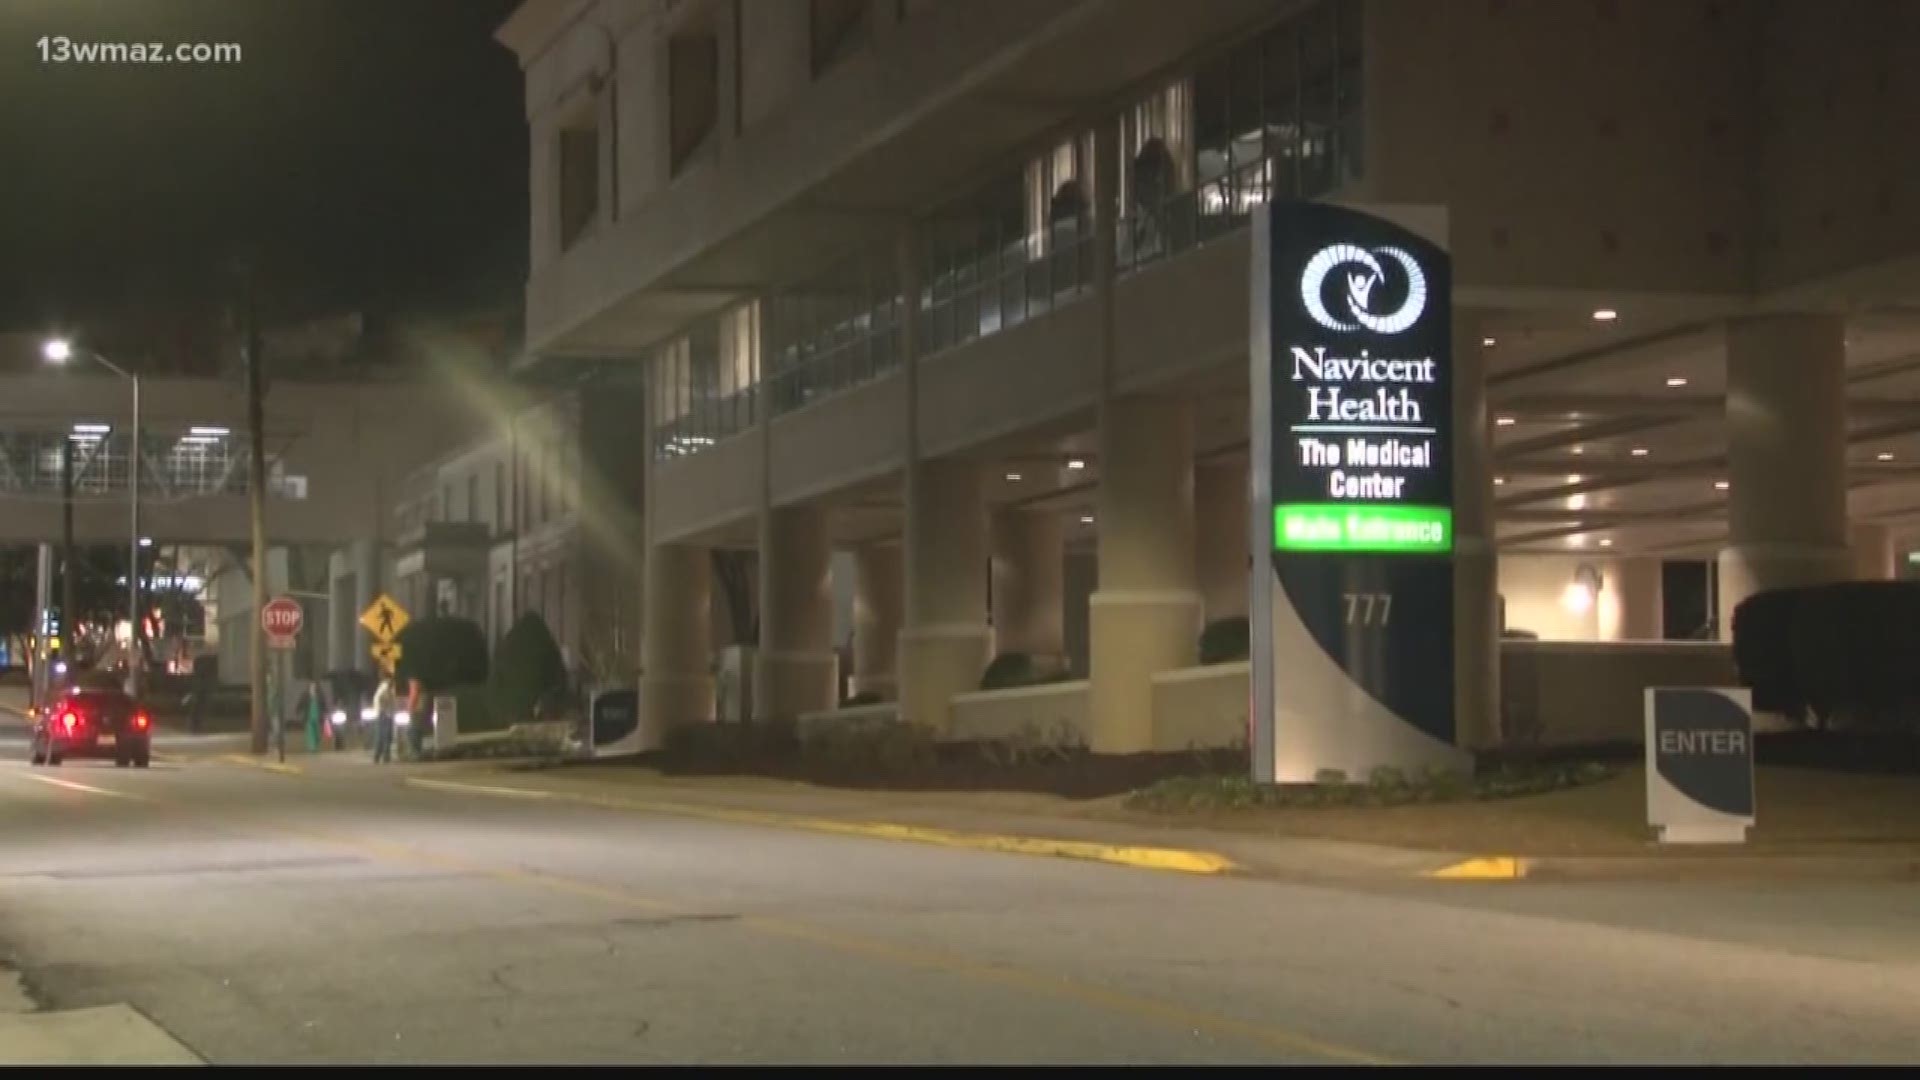 According to reports from our CBS affiliate in Charlotte, WBTV, North Carolina state regulators shot down a proposal from Atrium Health to refinance more than $300 million in debt. That debt, according to documents initially obtained by WBTV, belongs to Macon's Navicent Health.